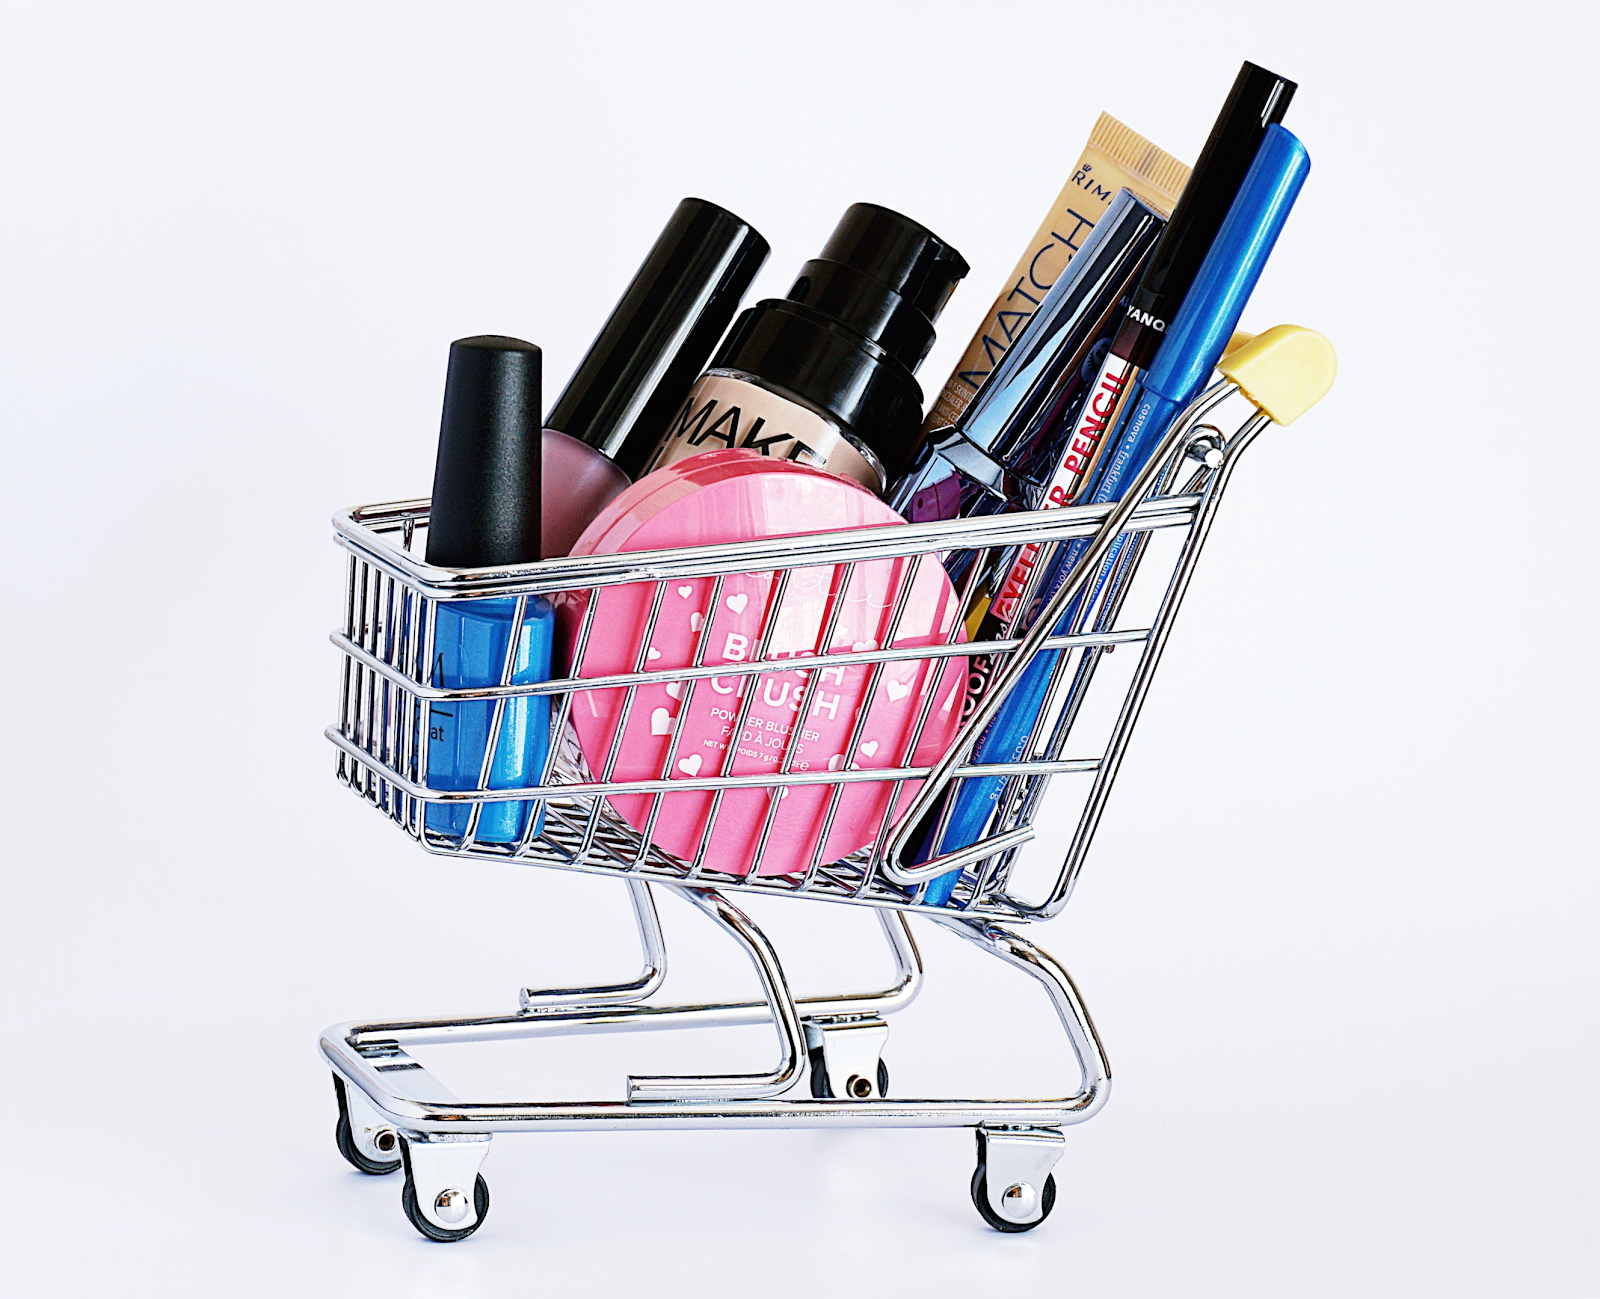 Choose high quality products from recommended makeup brands